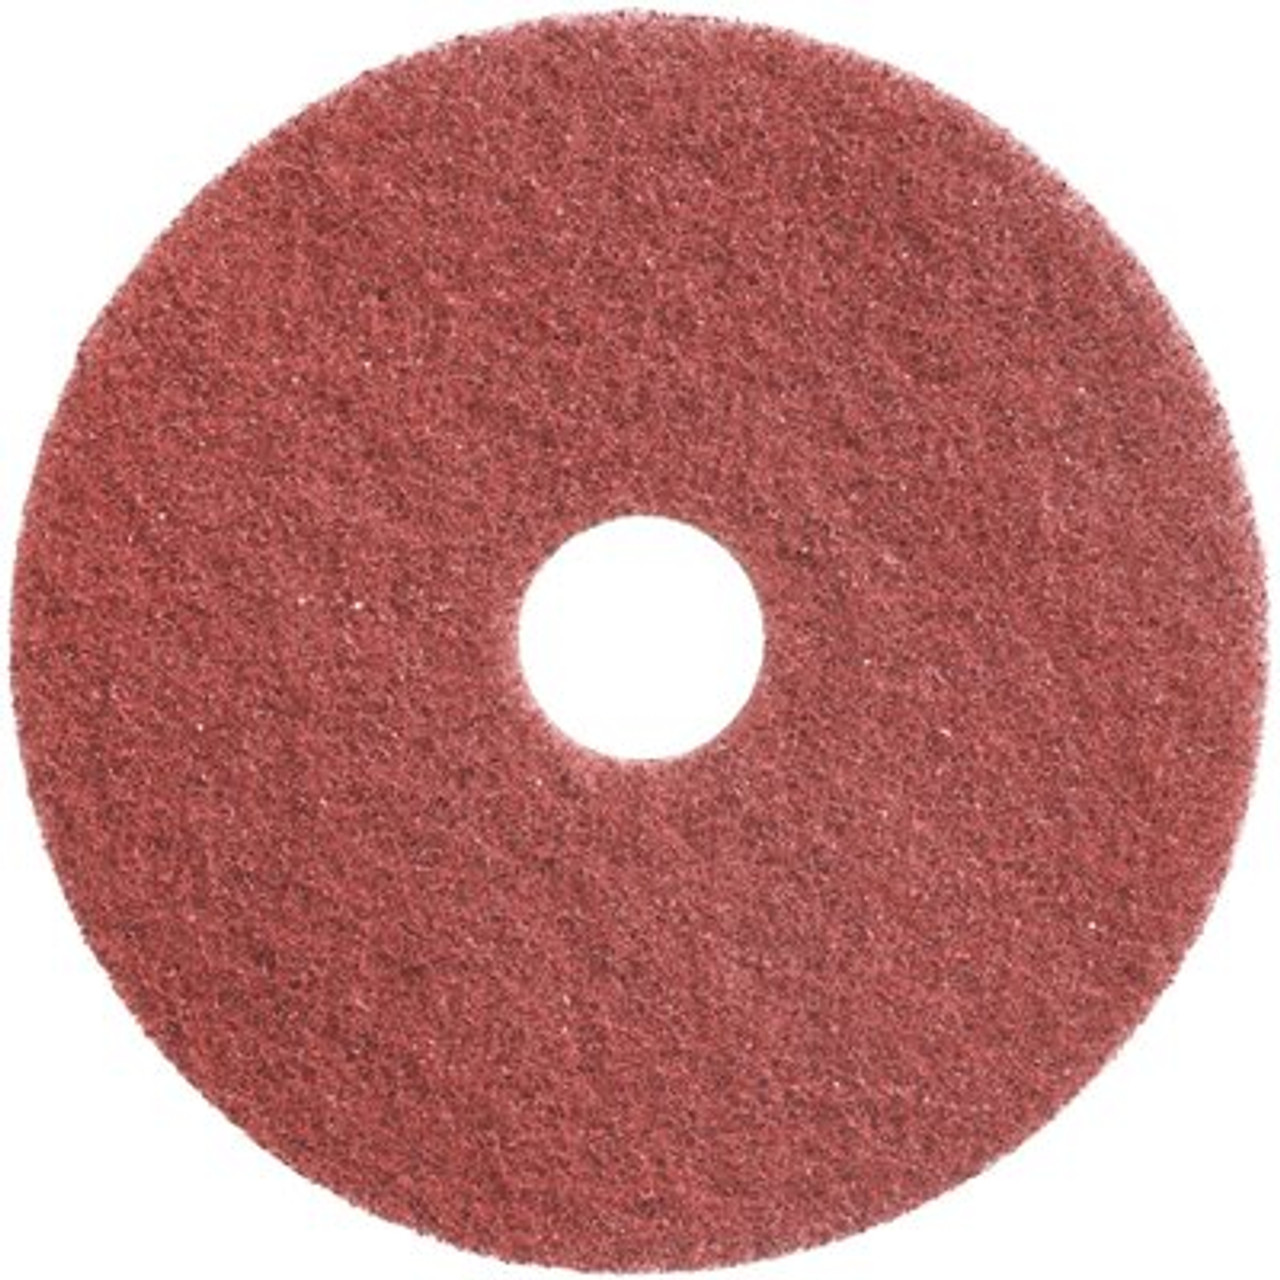 Twister 16 In. Red Ht Diamond Floor Pad (2-Count)